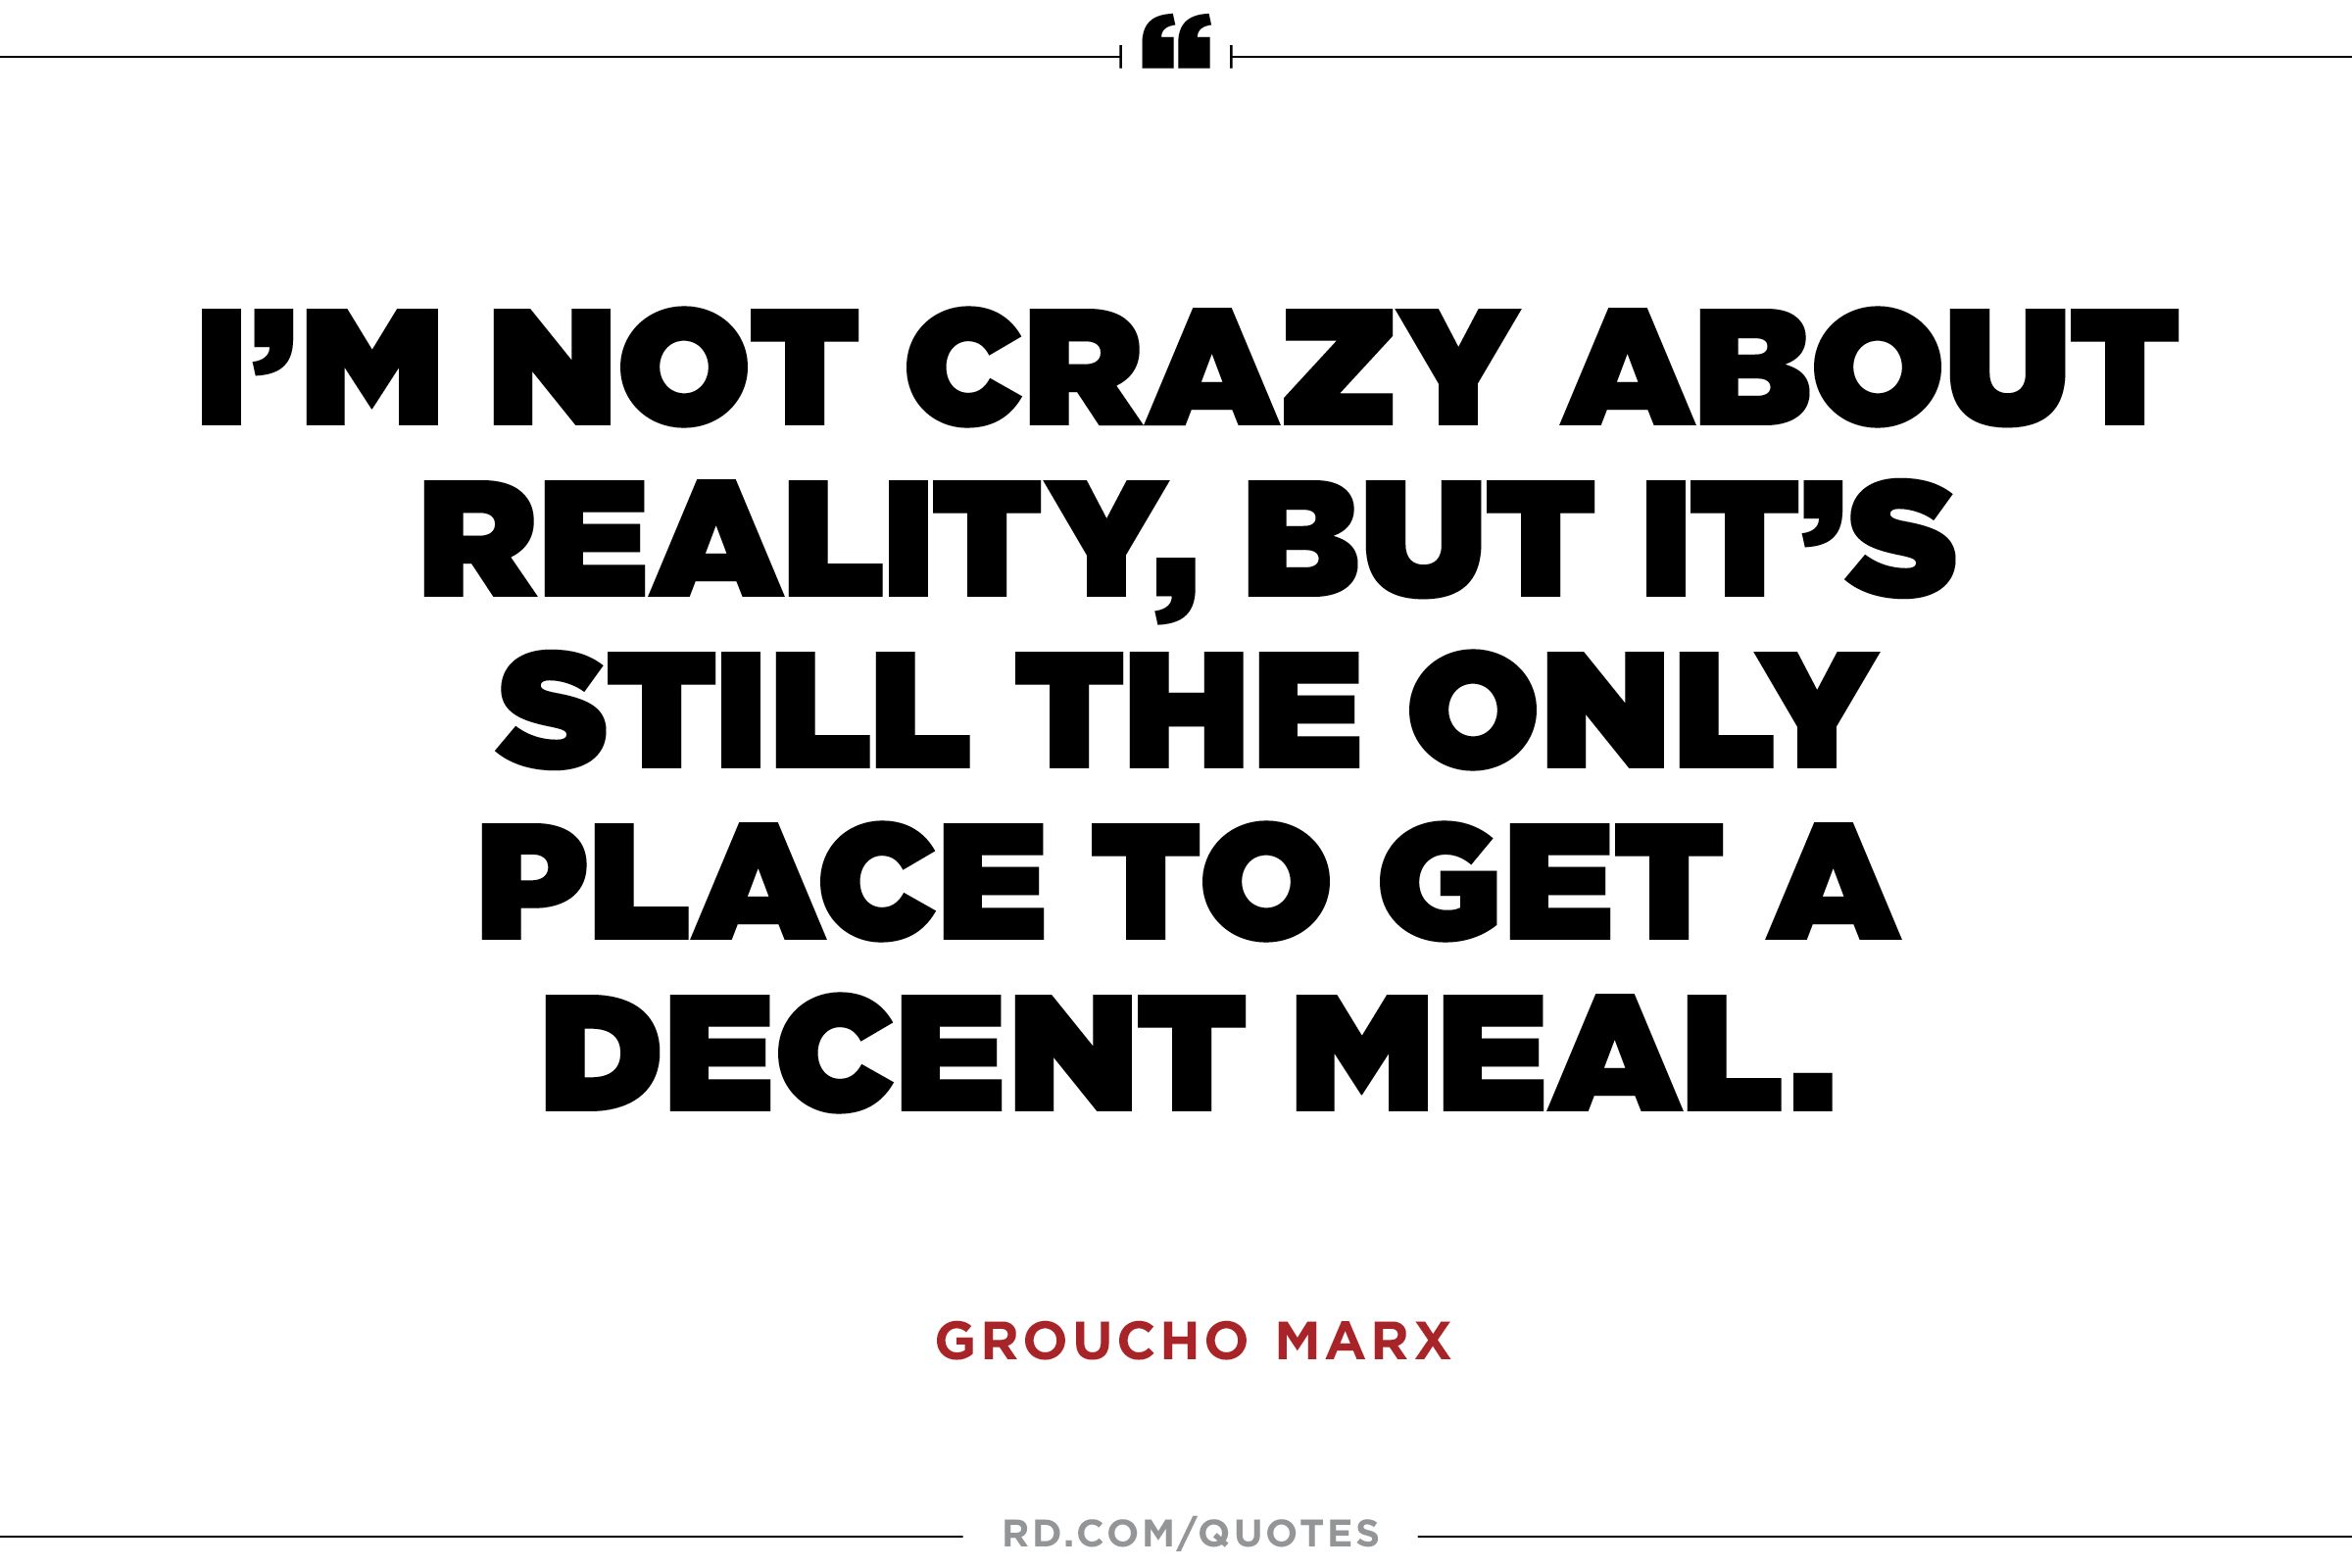 funny but brainy quotes 12 wise groucho marx quotes reader u0027s digest reader u0027s digest